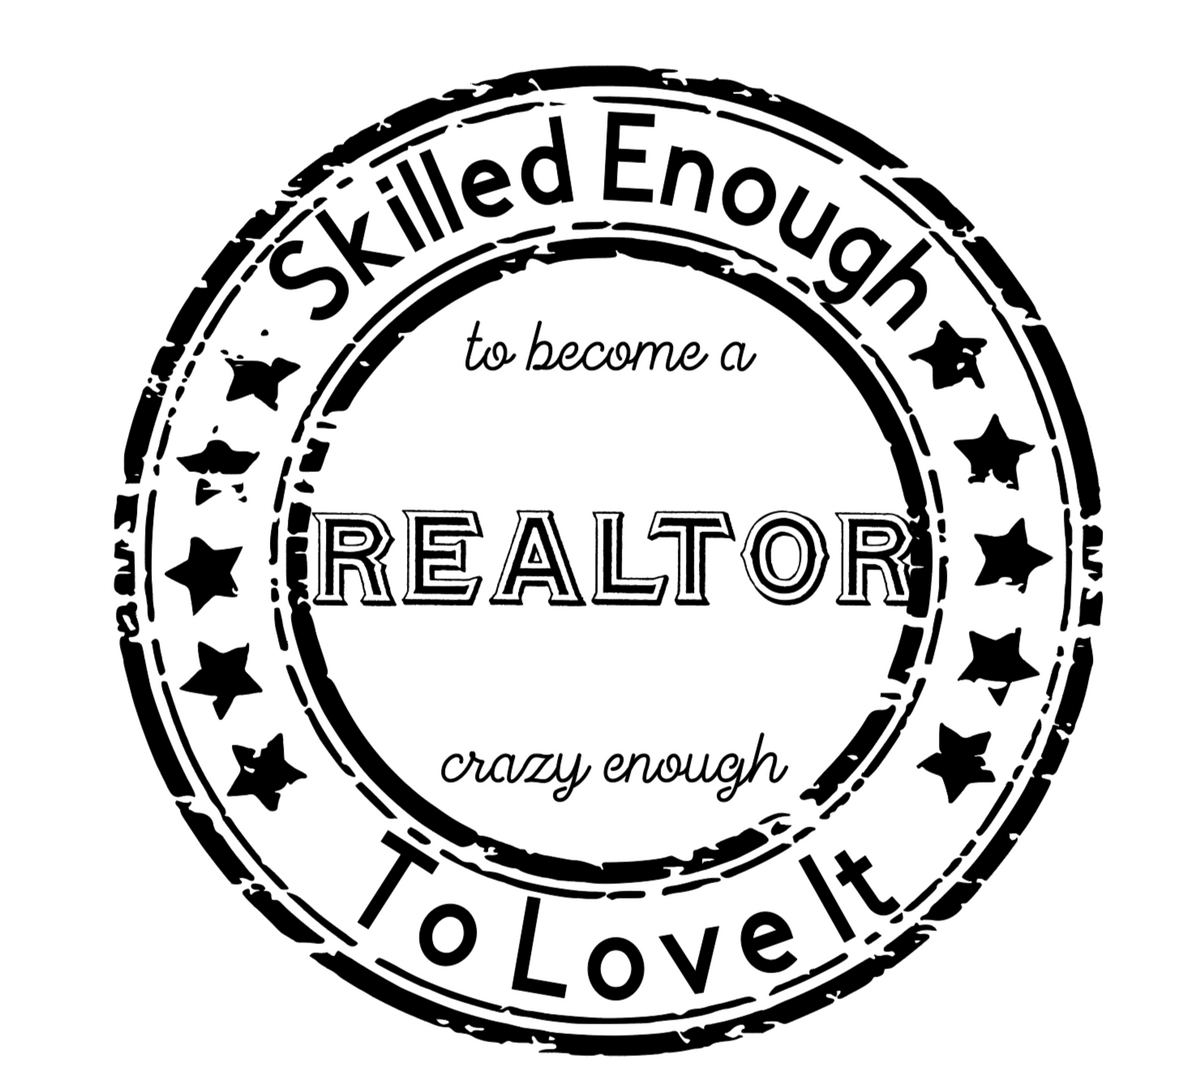 Skilled Enough To Be a Realtor real estate t-shirt